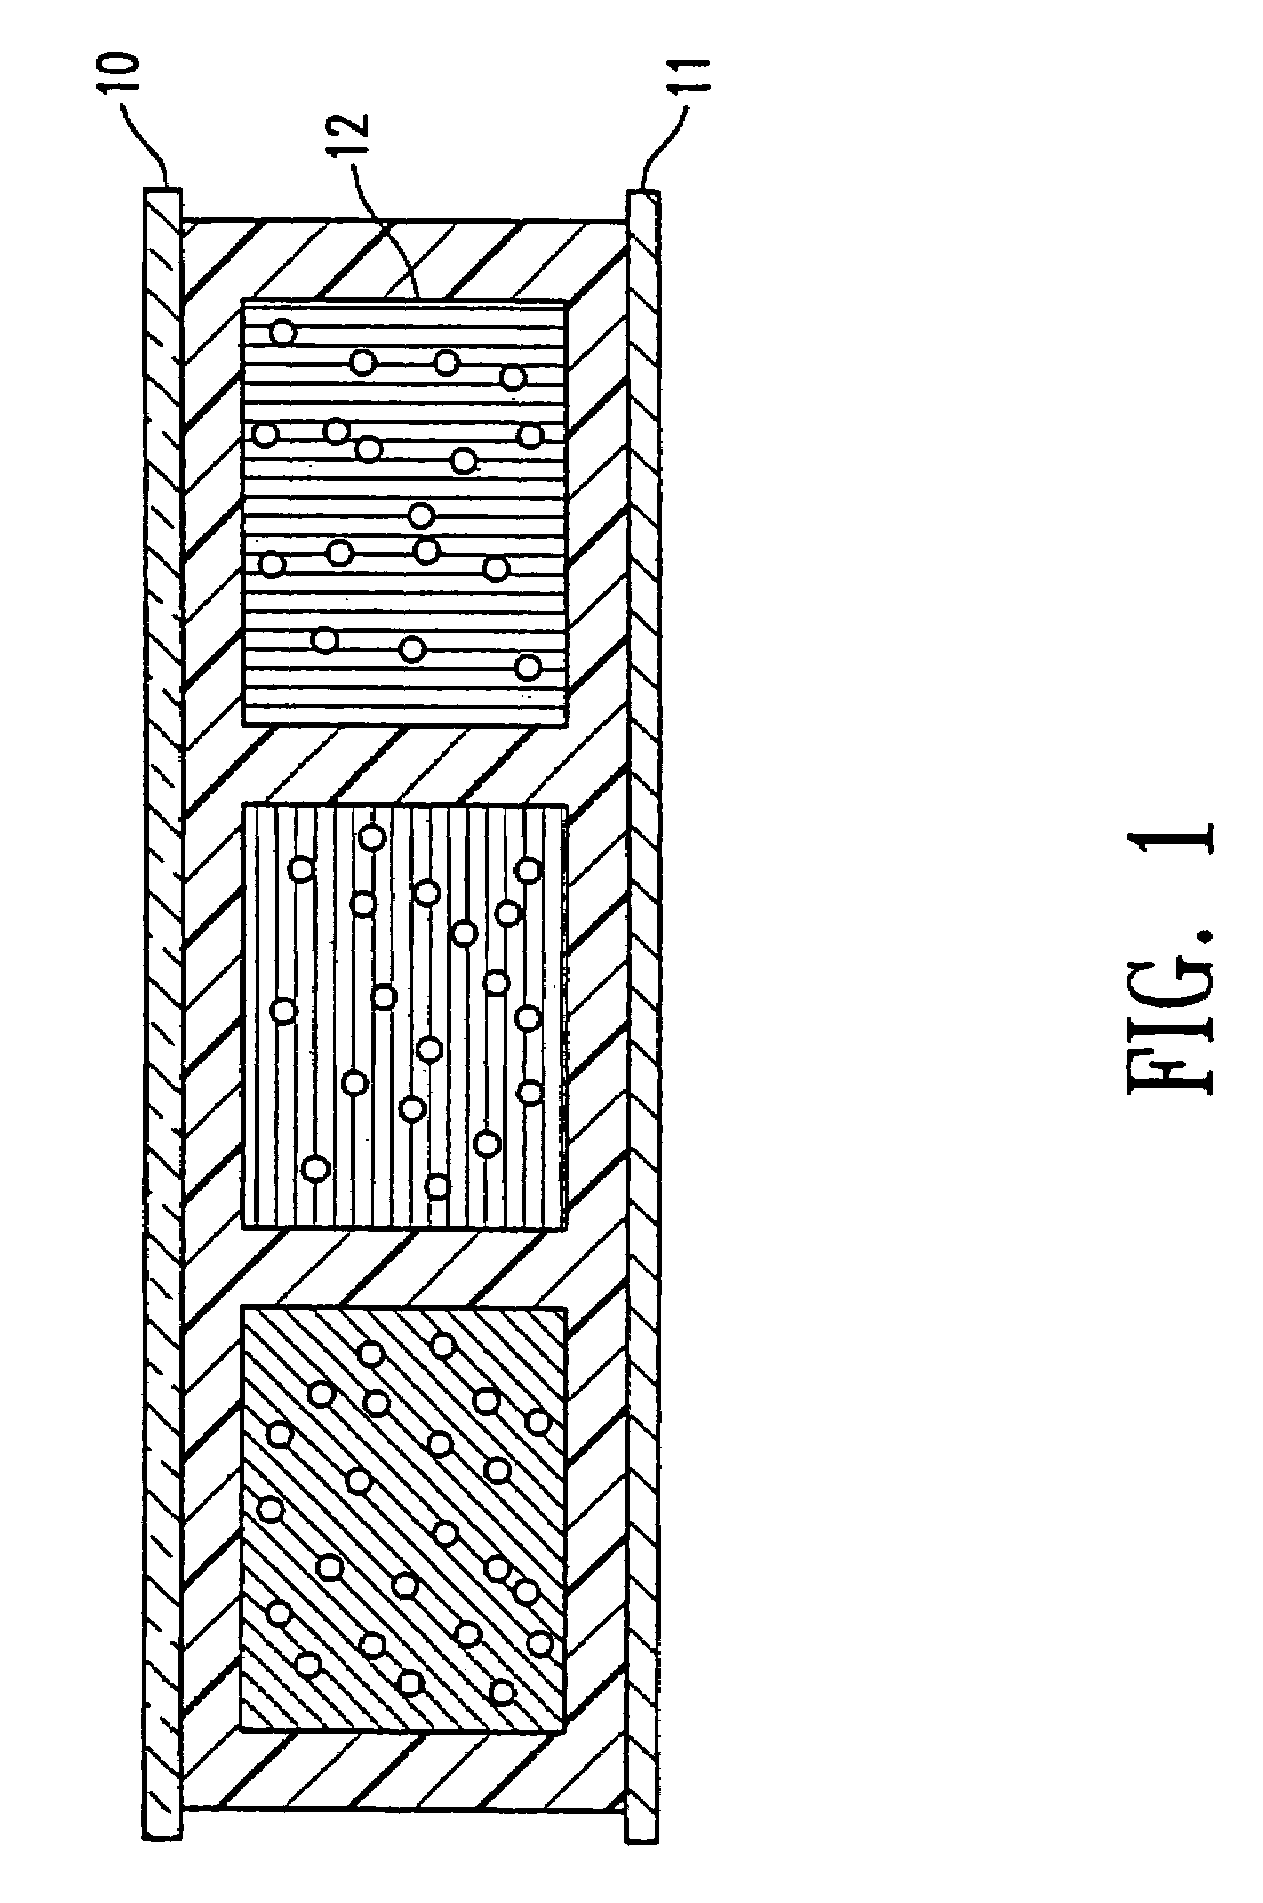 Electrophoretic display and process for its manufacture